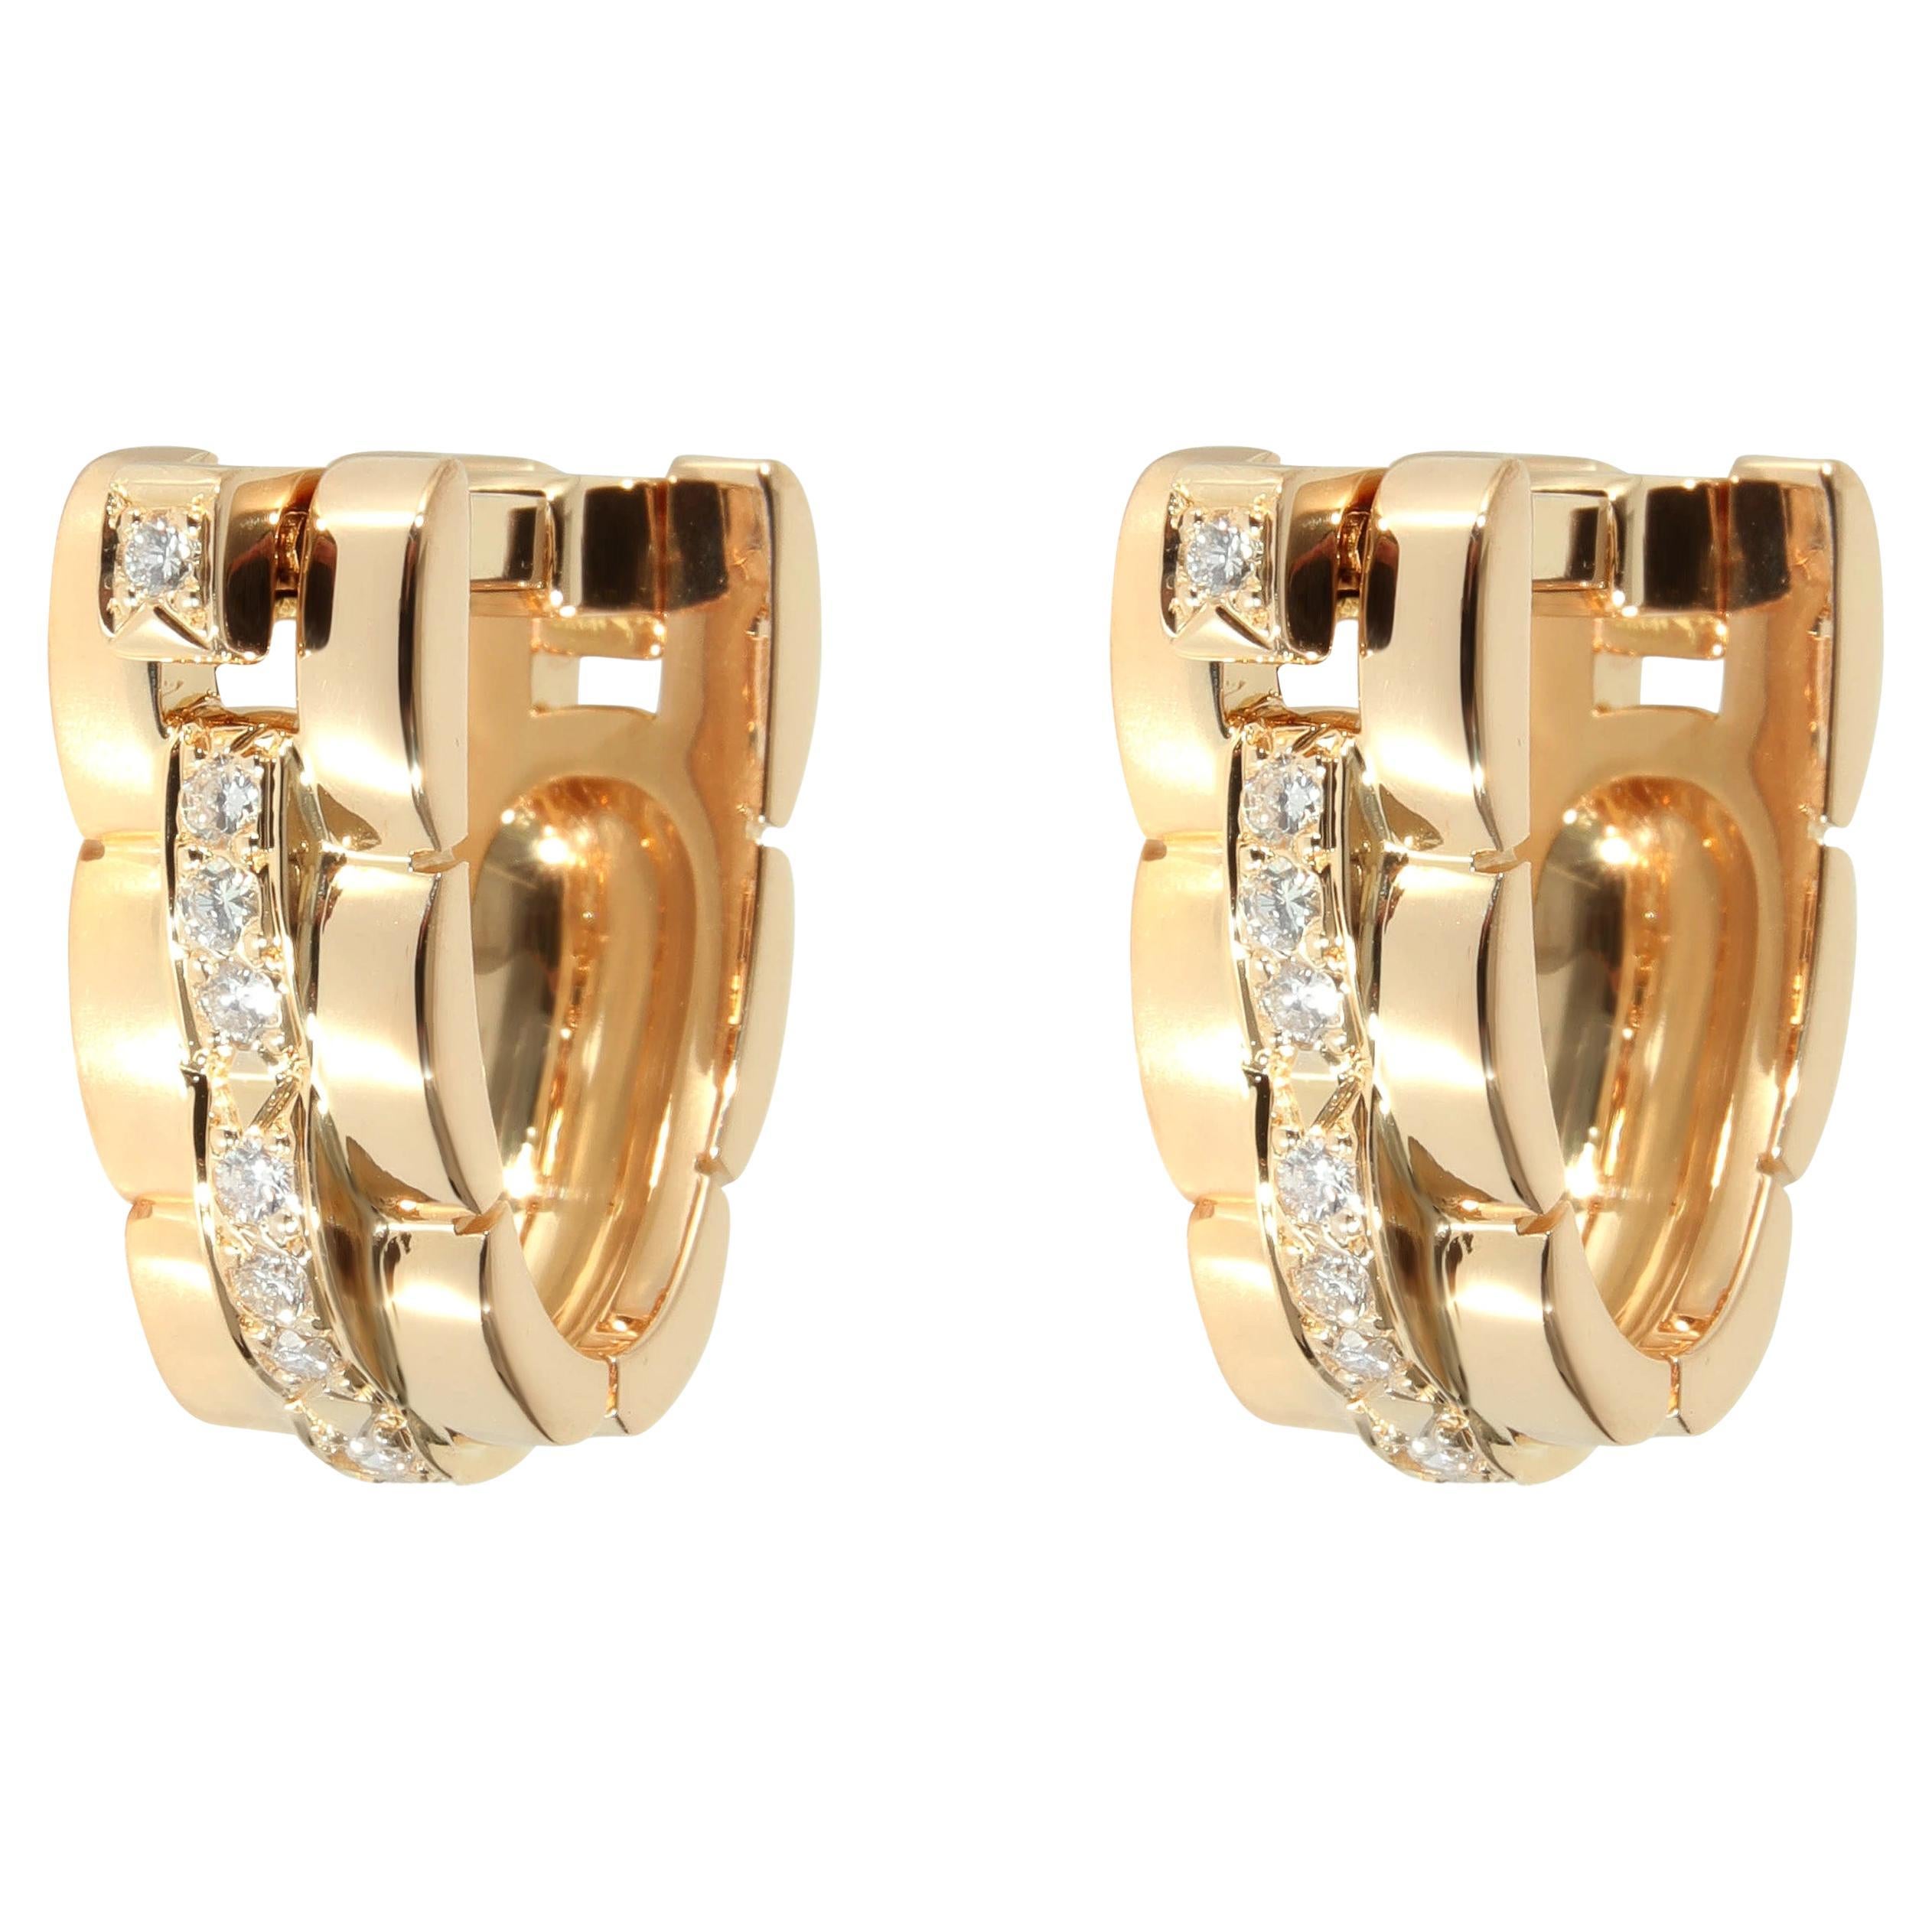 Cartier Maillon Panthere Cufflinks in 18K Yellow Gold 0.35 CTW